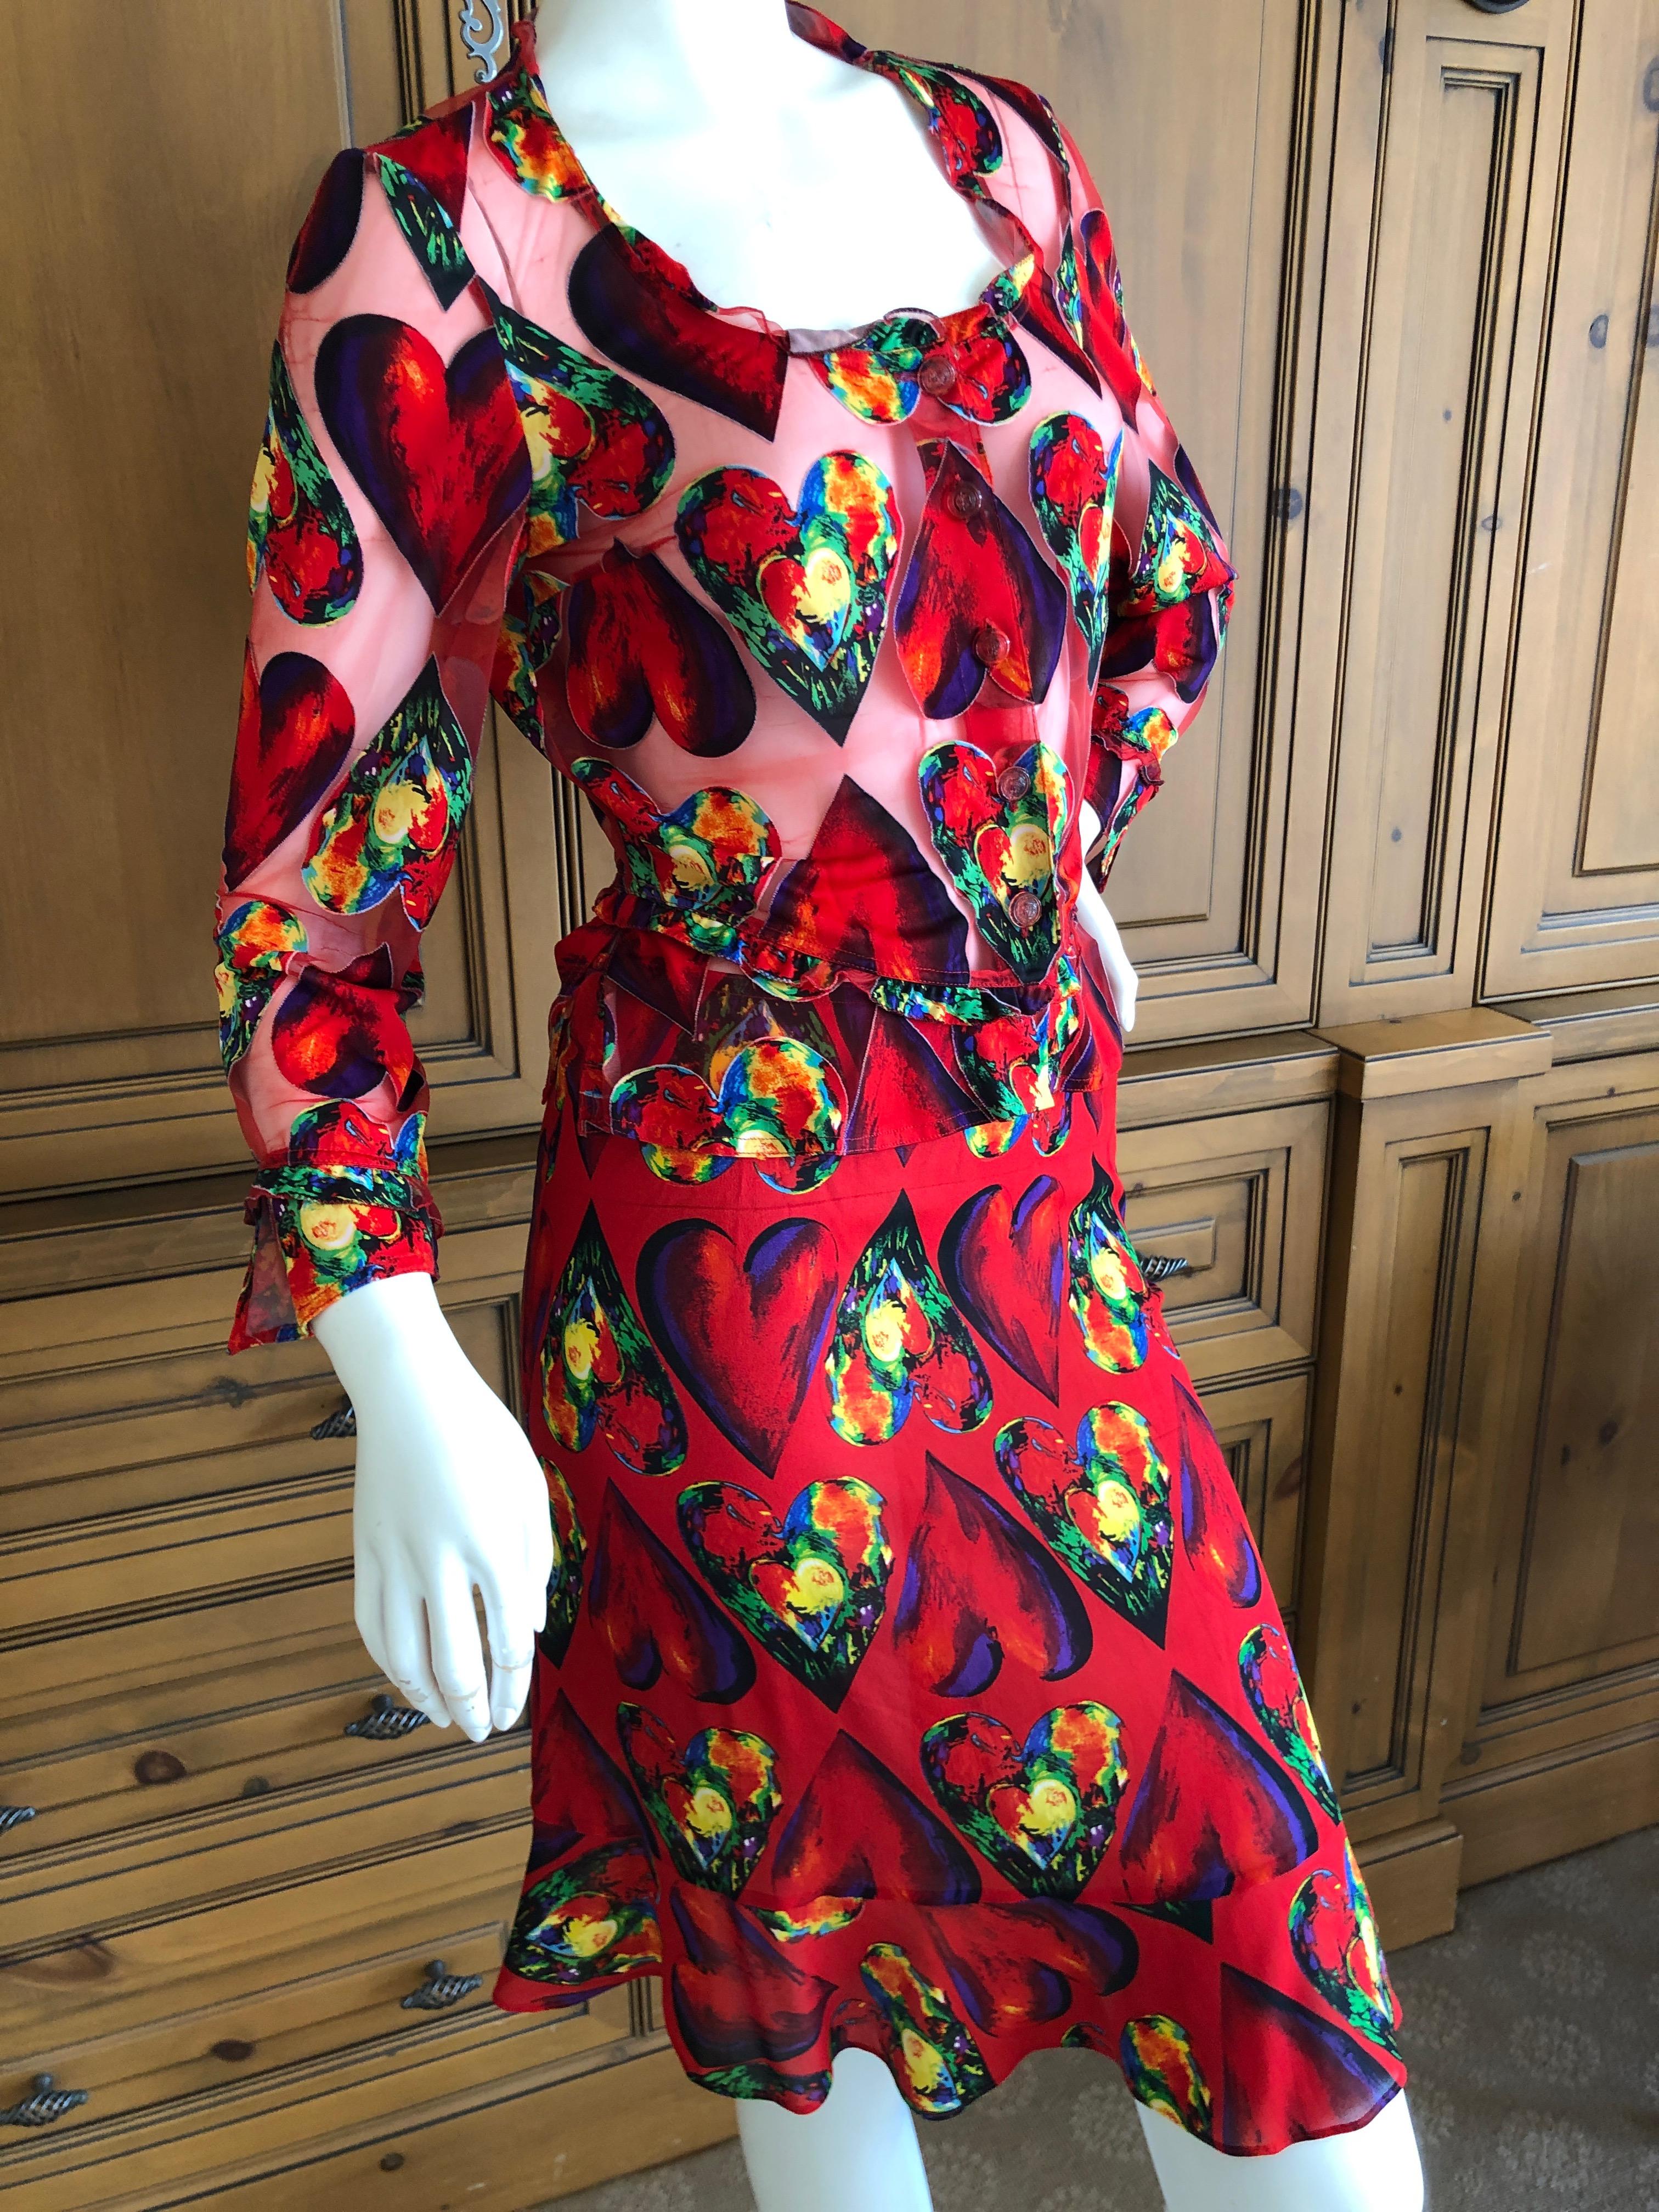 Gianni Versace Couture Spring 1997 Jim Dine Heart Print Sheer Skirt Suit For Sale 3